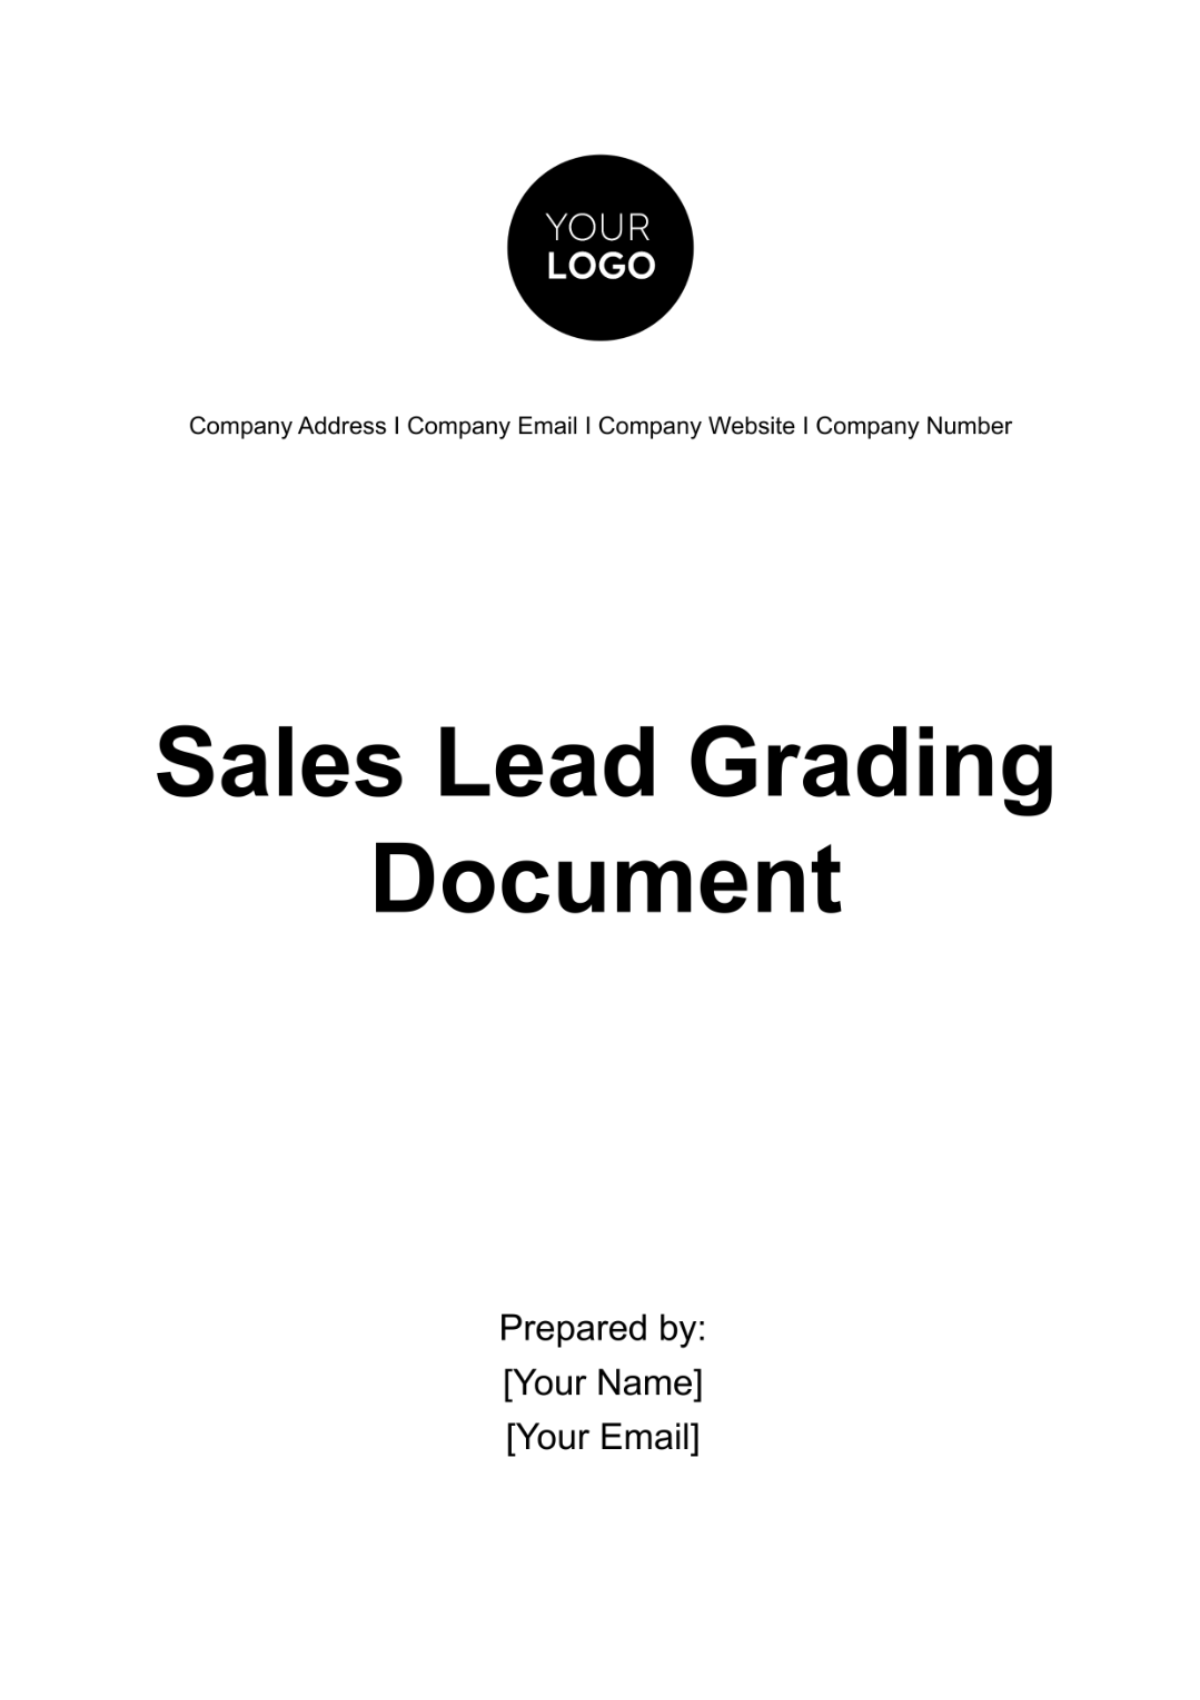 Sales Lead Grading Document Template